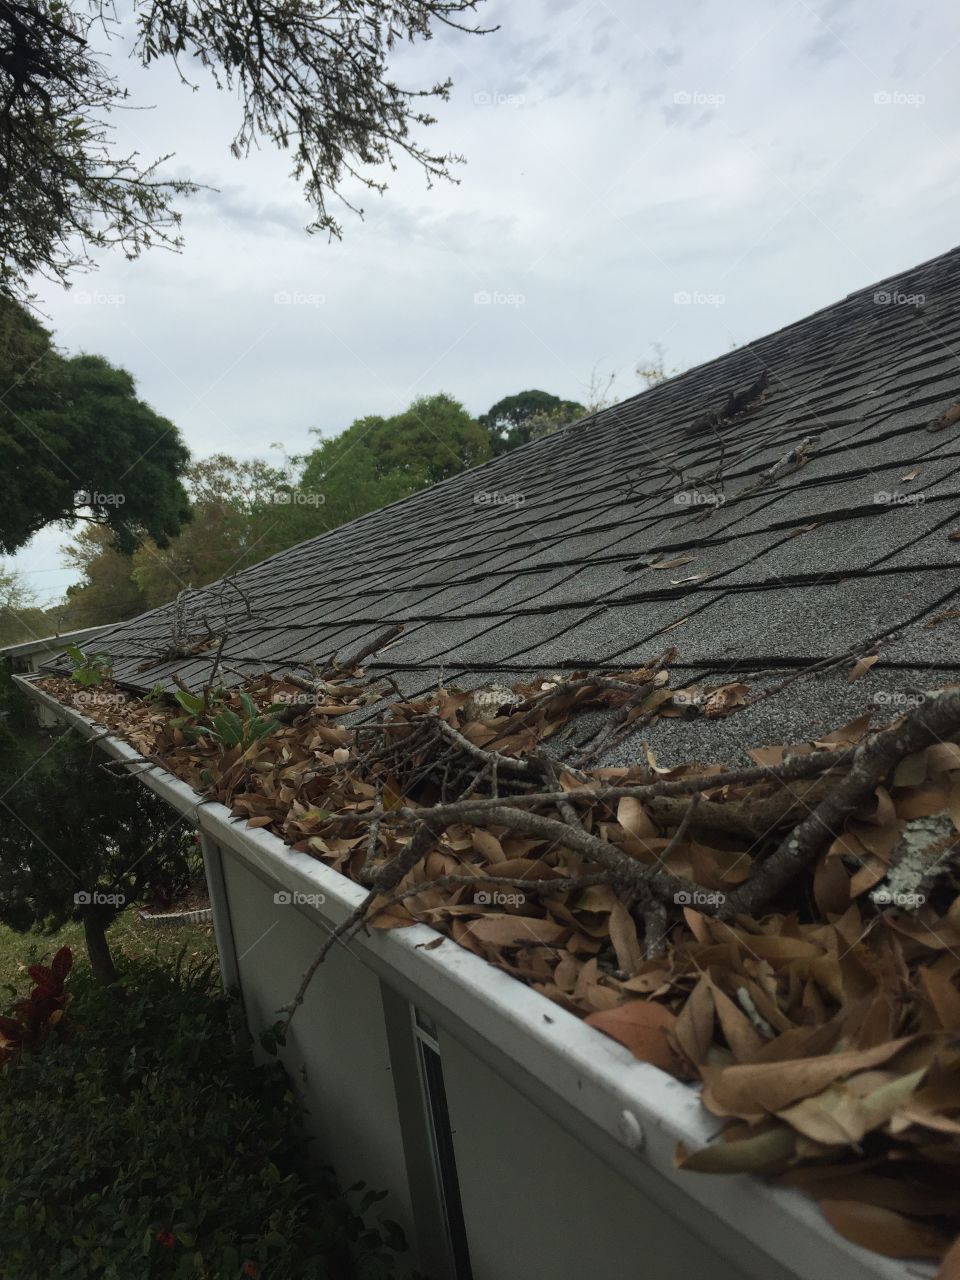 Roof Gutter Cleaning 